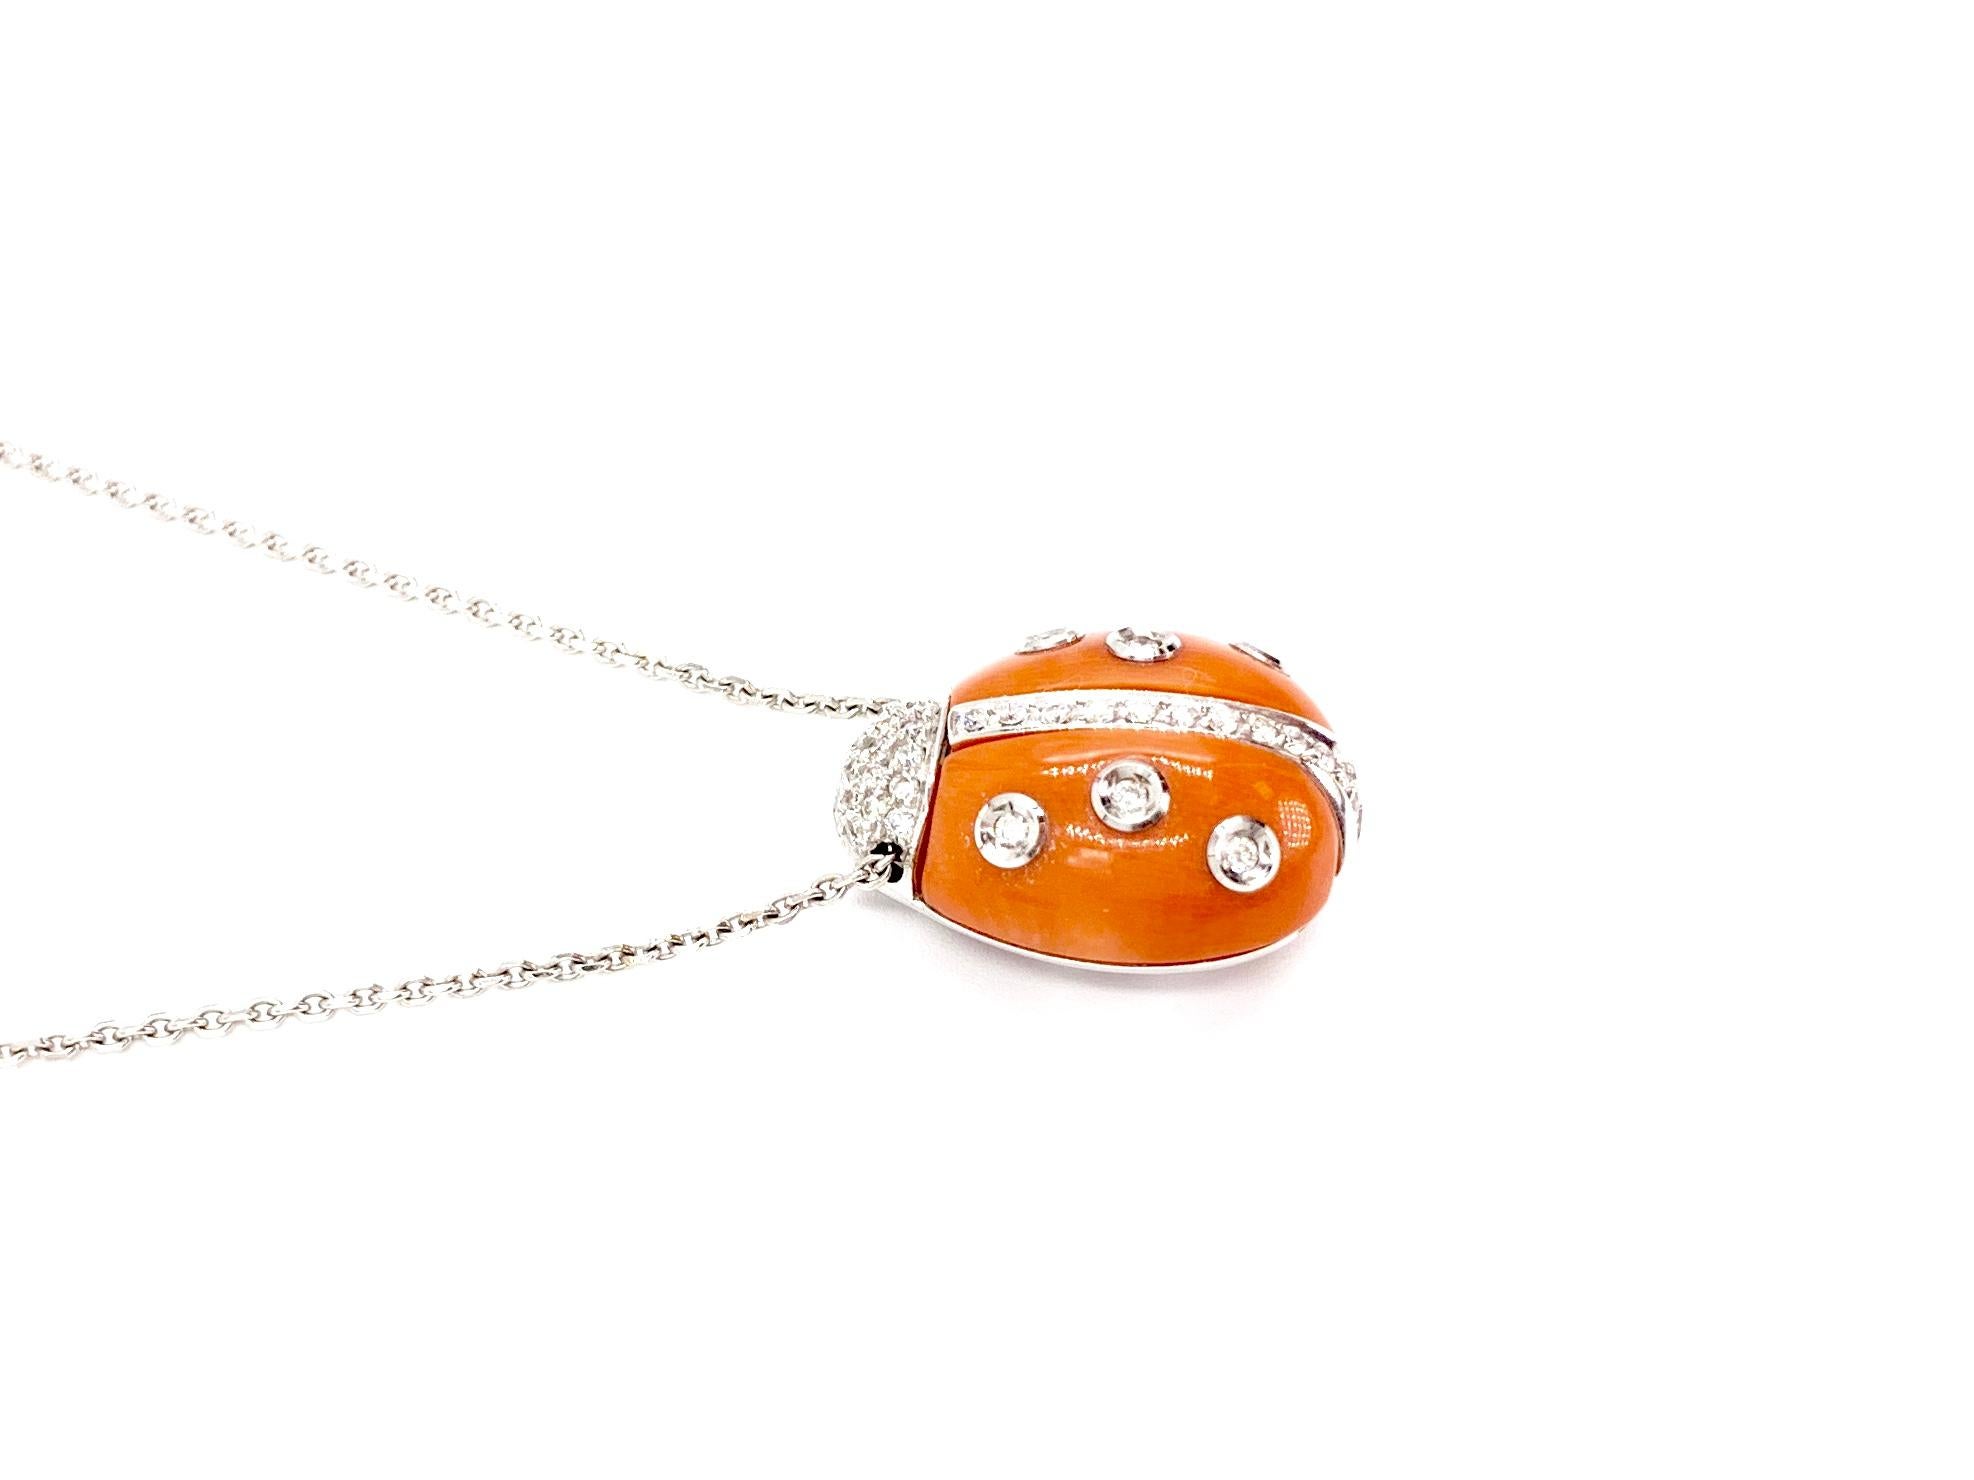 An adorable treasure, this 18 karat white gold ladybug pendant necklace features two solid pieces of beautiful orange coral and .30 carats of white round brilliant diamonds. Diamond quality is approximately F-G color, VS2 clarity. Coral is in